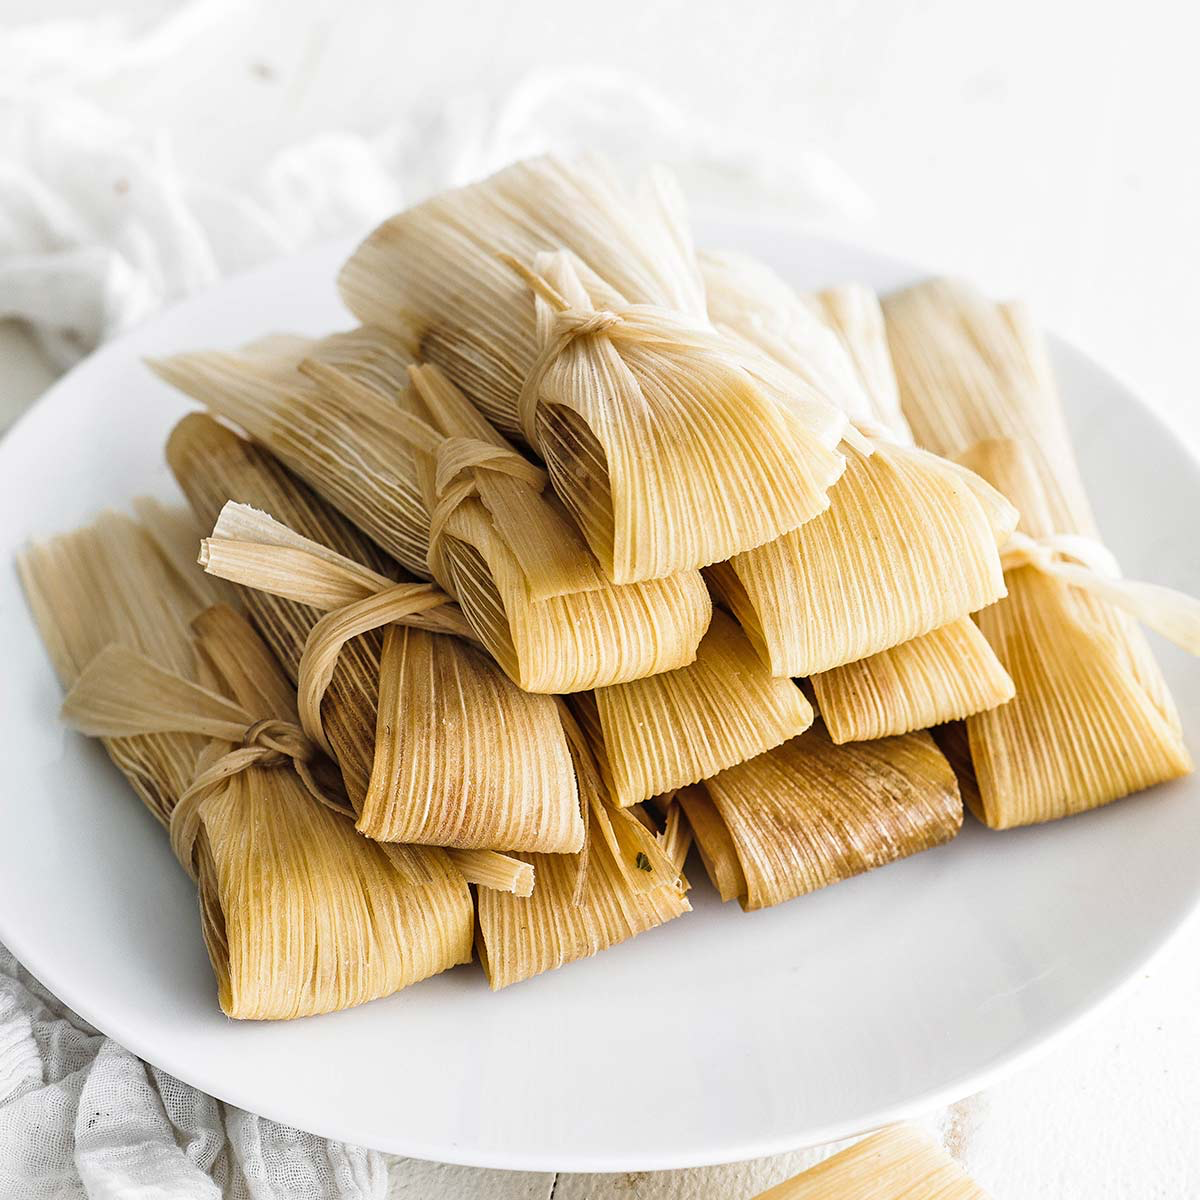 How To Steam Tamales Like A Pro: A Simple Step-by-Step Guide